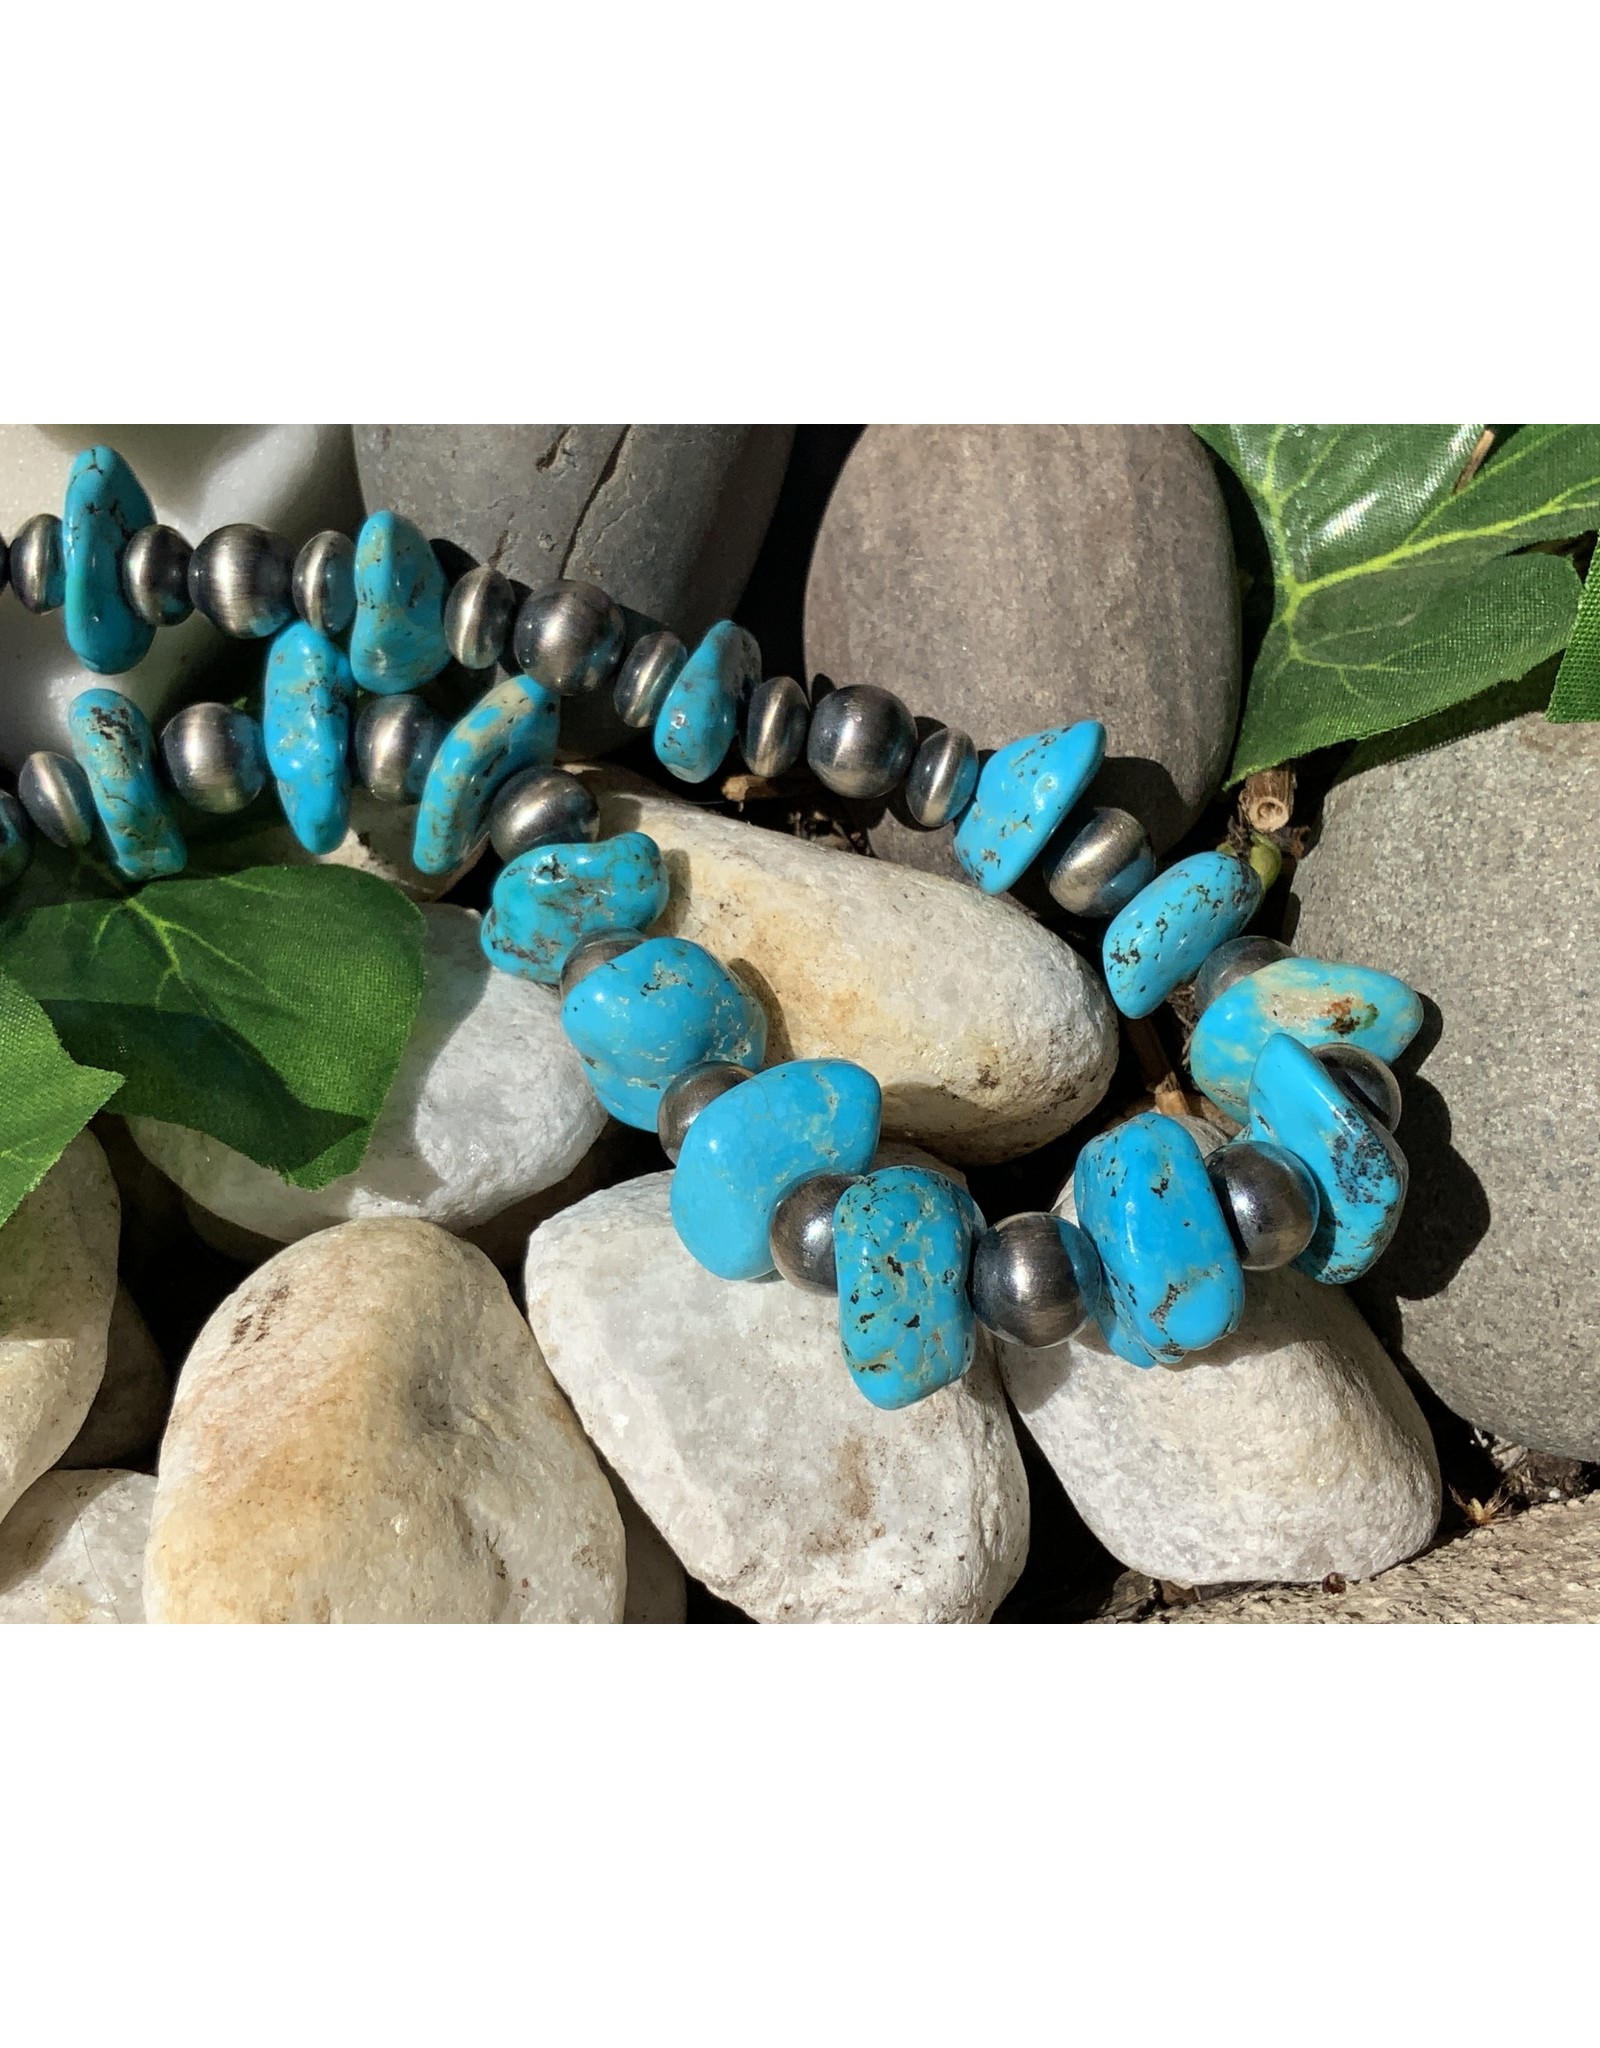 Annette Colby - Jeweler Sleeping Beauty Turquoise Sterling Navaho Beads Necklace - AC*